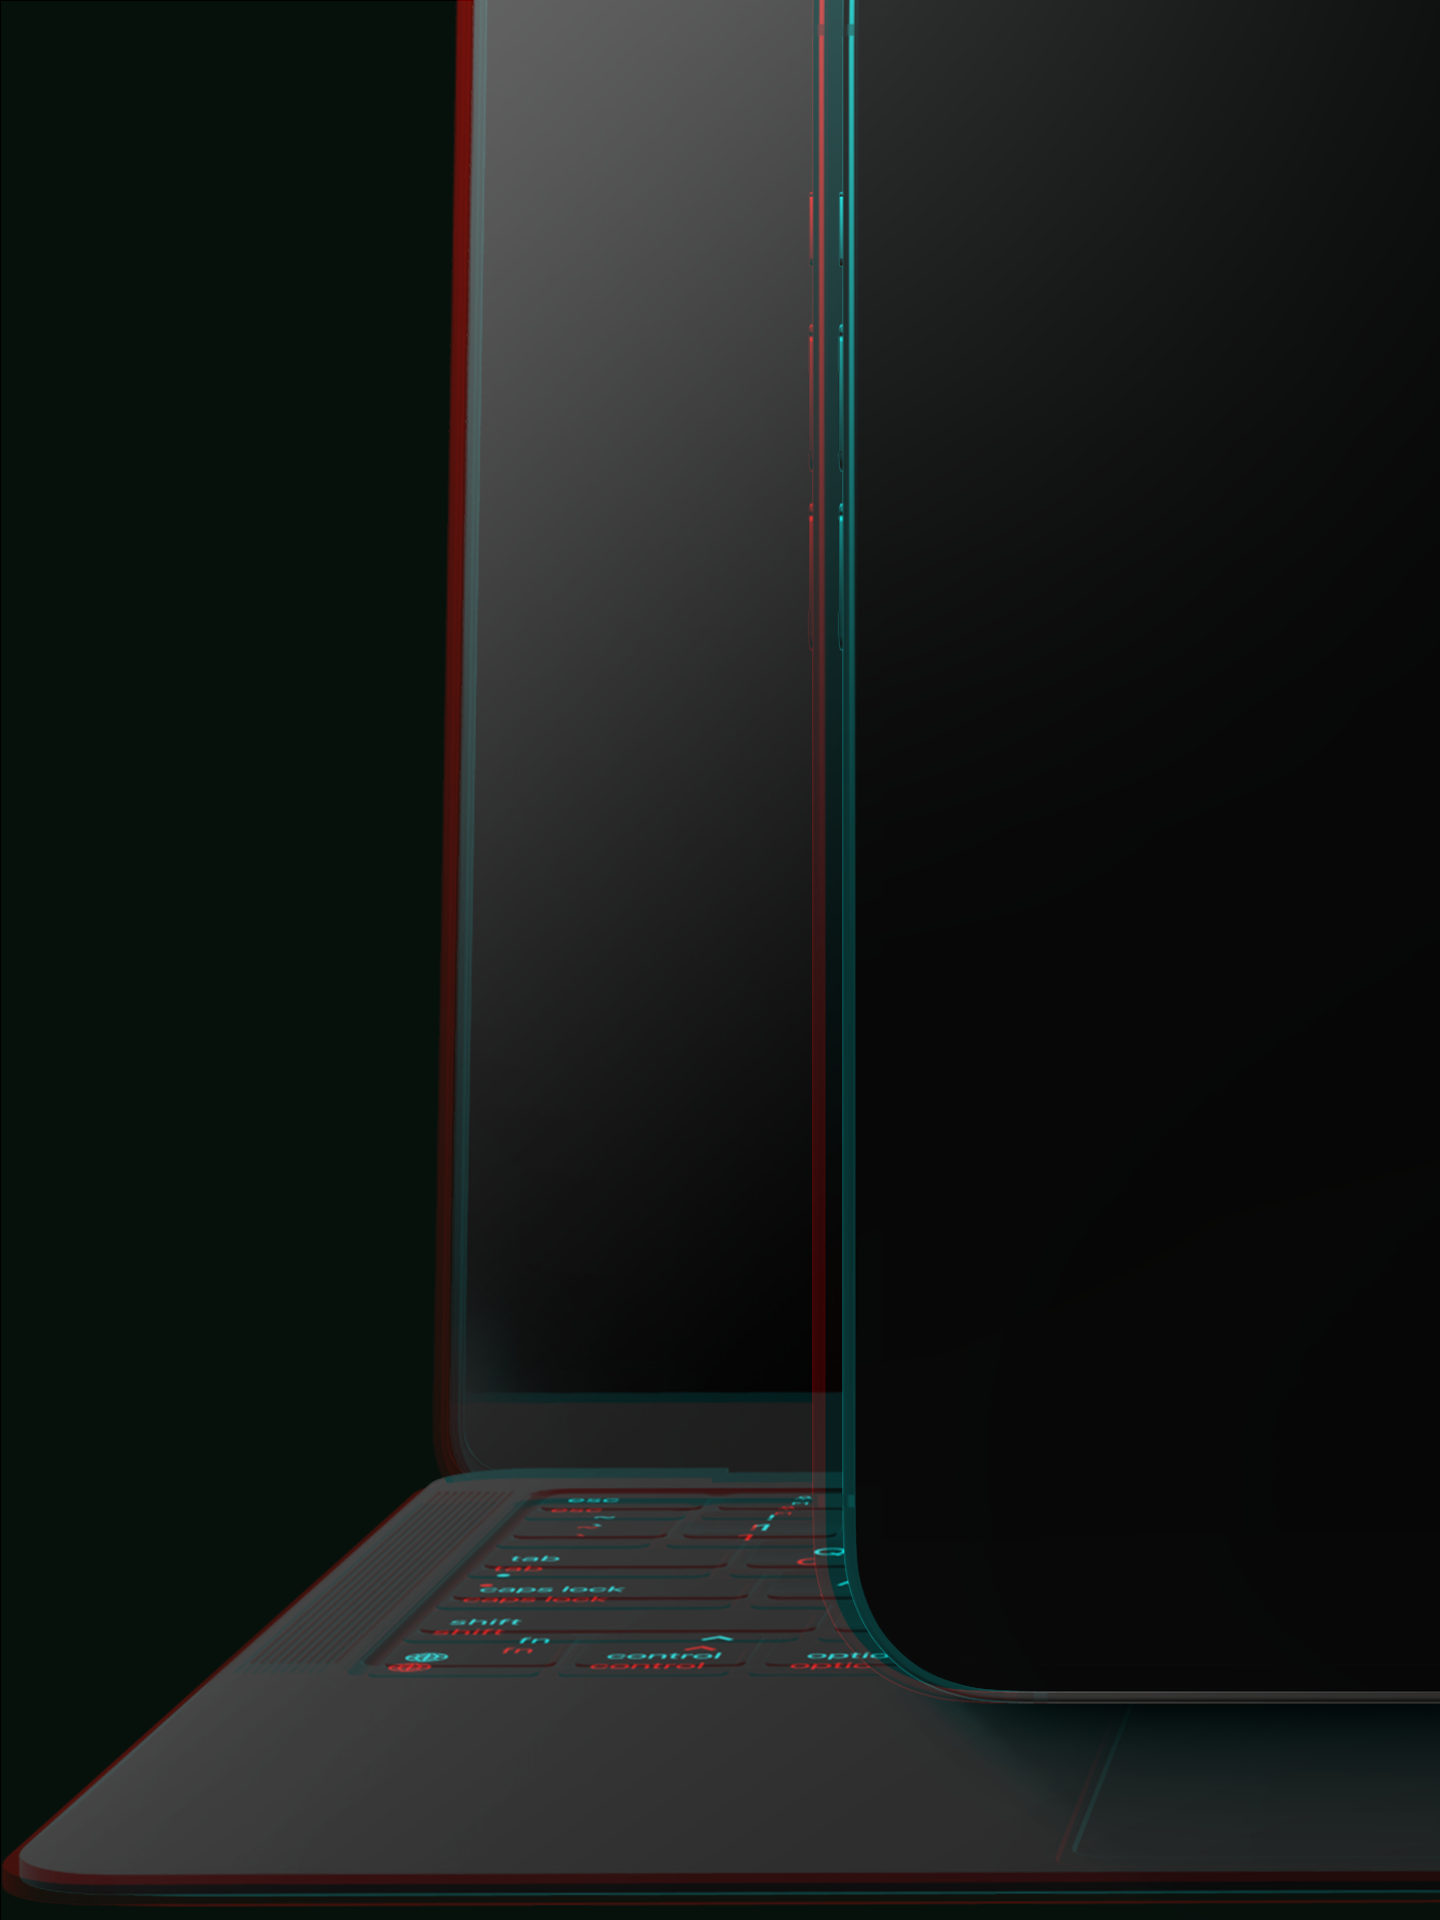 Section of the lower part of mobile and laptop screen with a glitch effect making the outline blue and red.